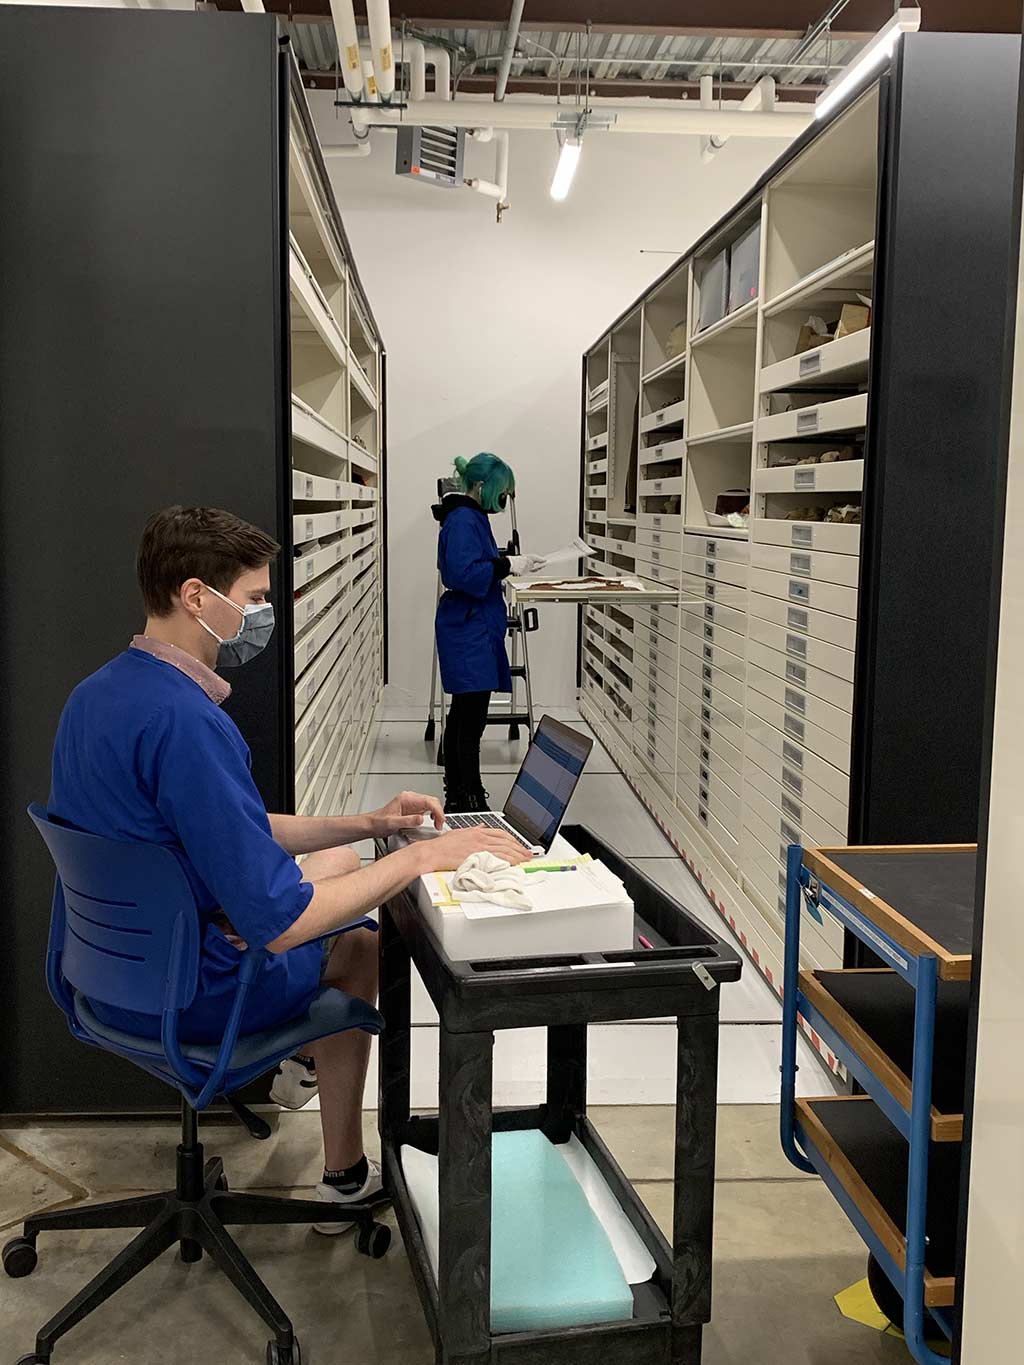 two of the museum's staff working on inventory in front of storage sheves and drawers